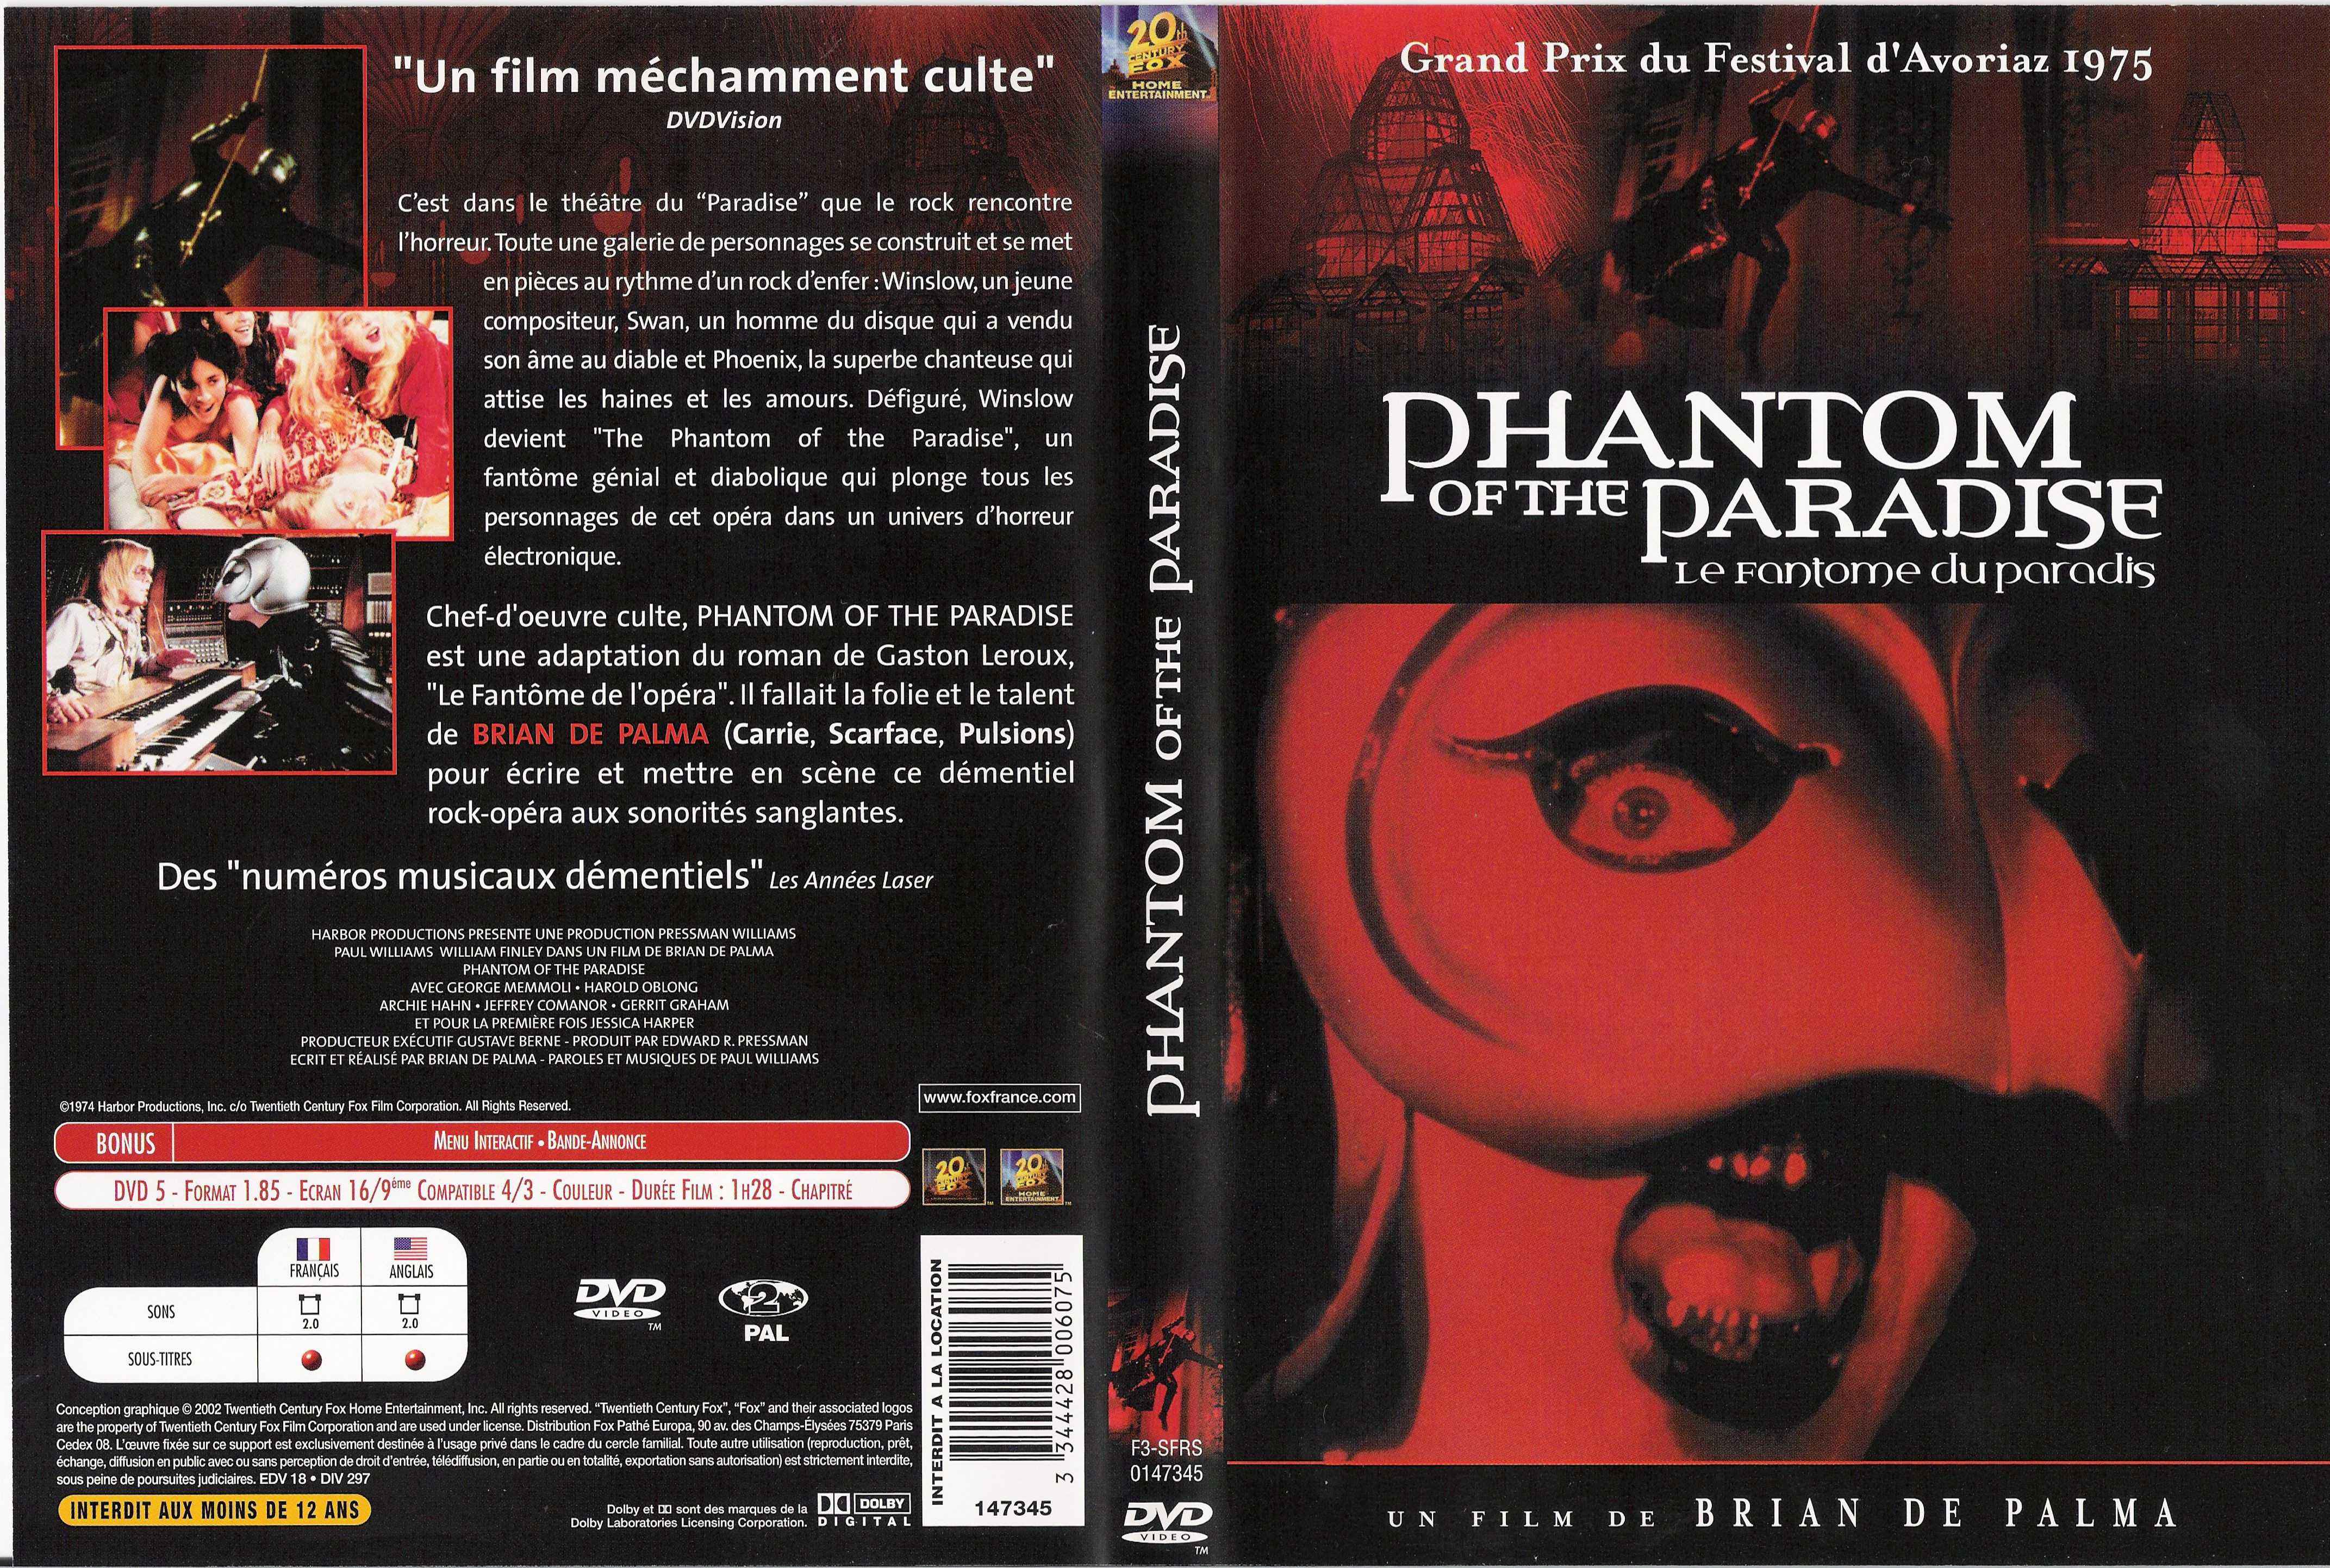 Jaquette DVD Phantom of the paradise